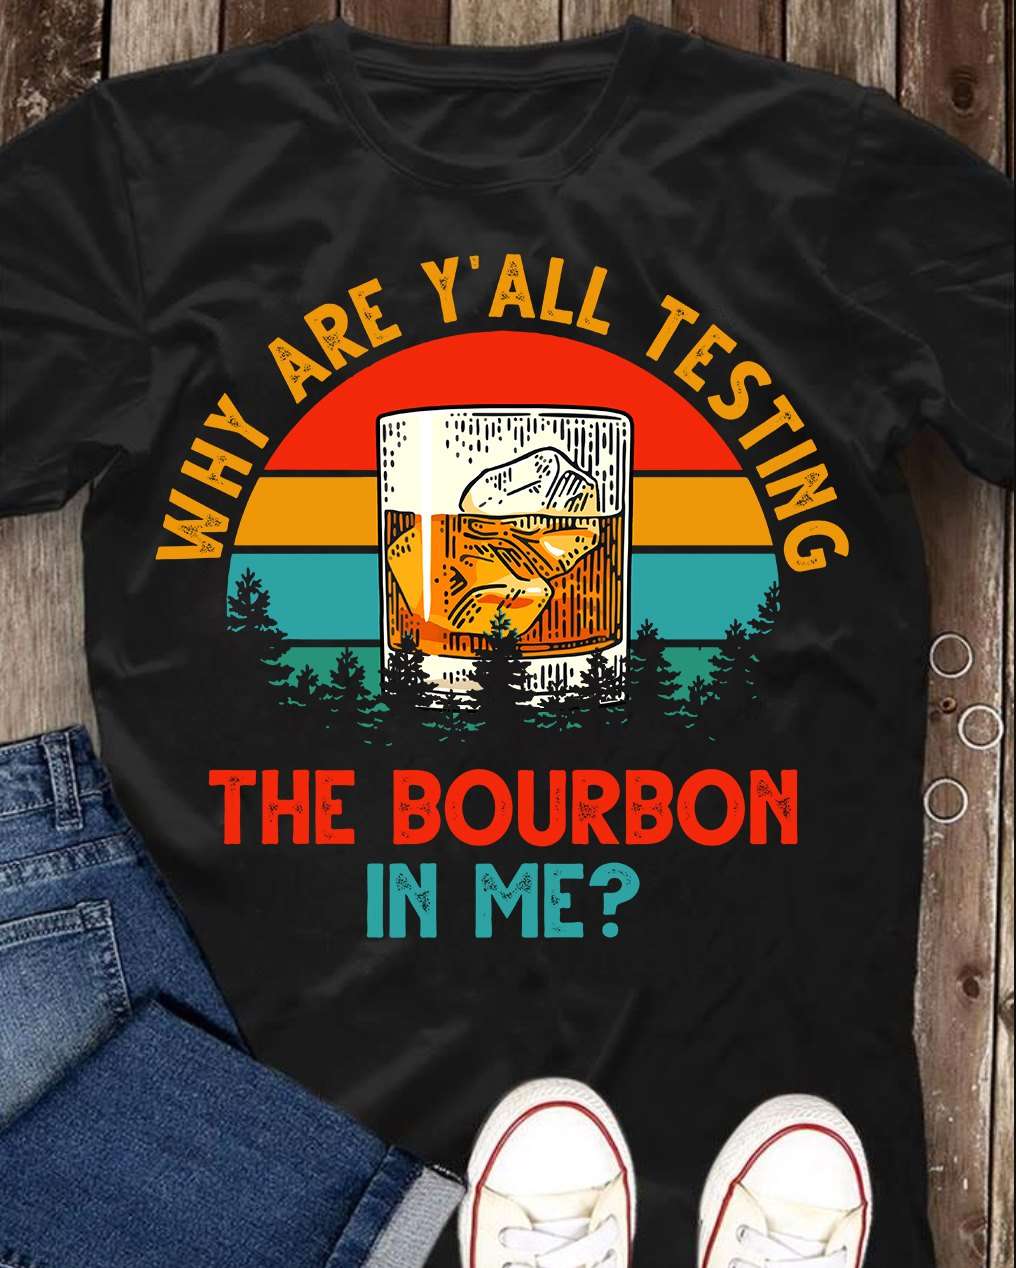 Why are y'all testing the bourbon in me - Glass of bourbon wine, love drinking bourbon